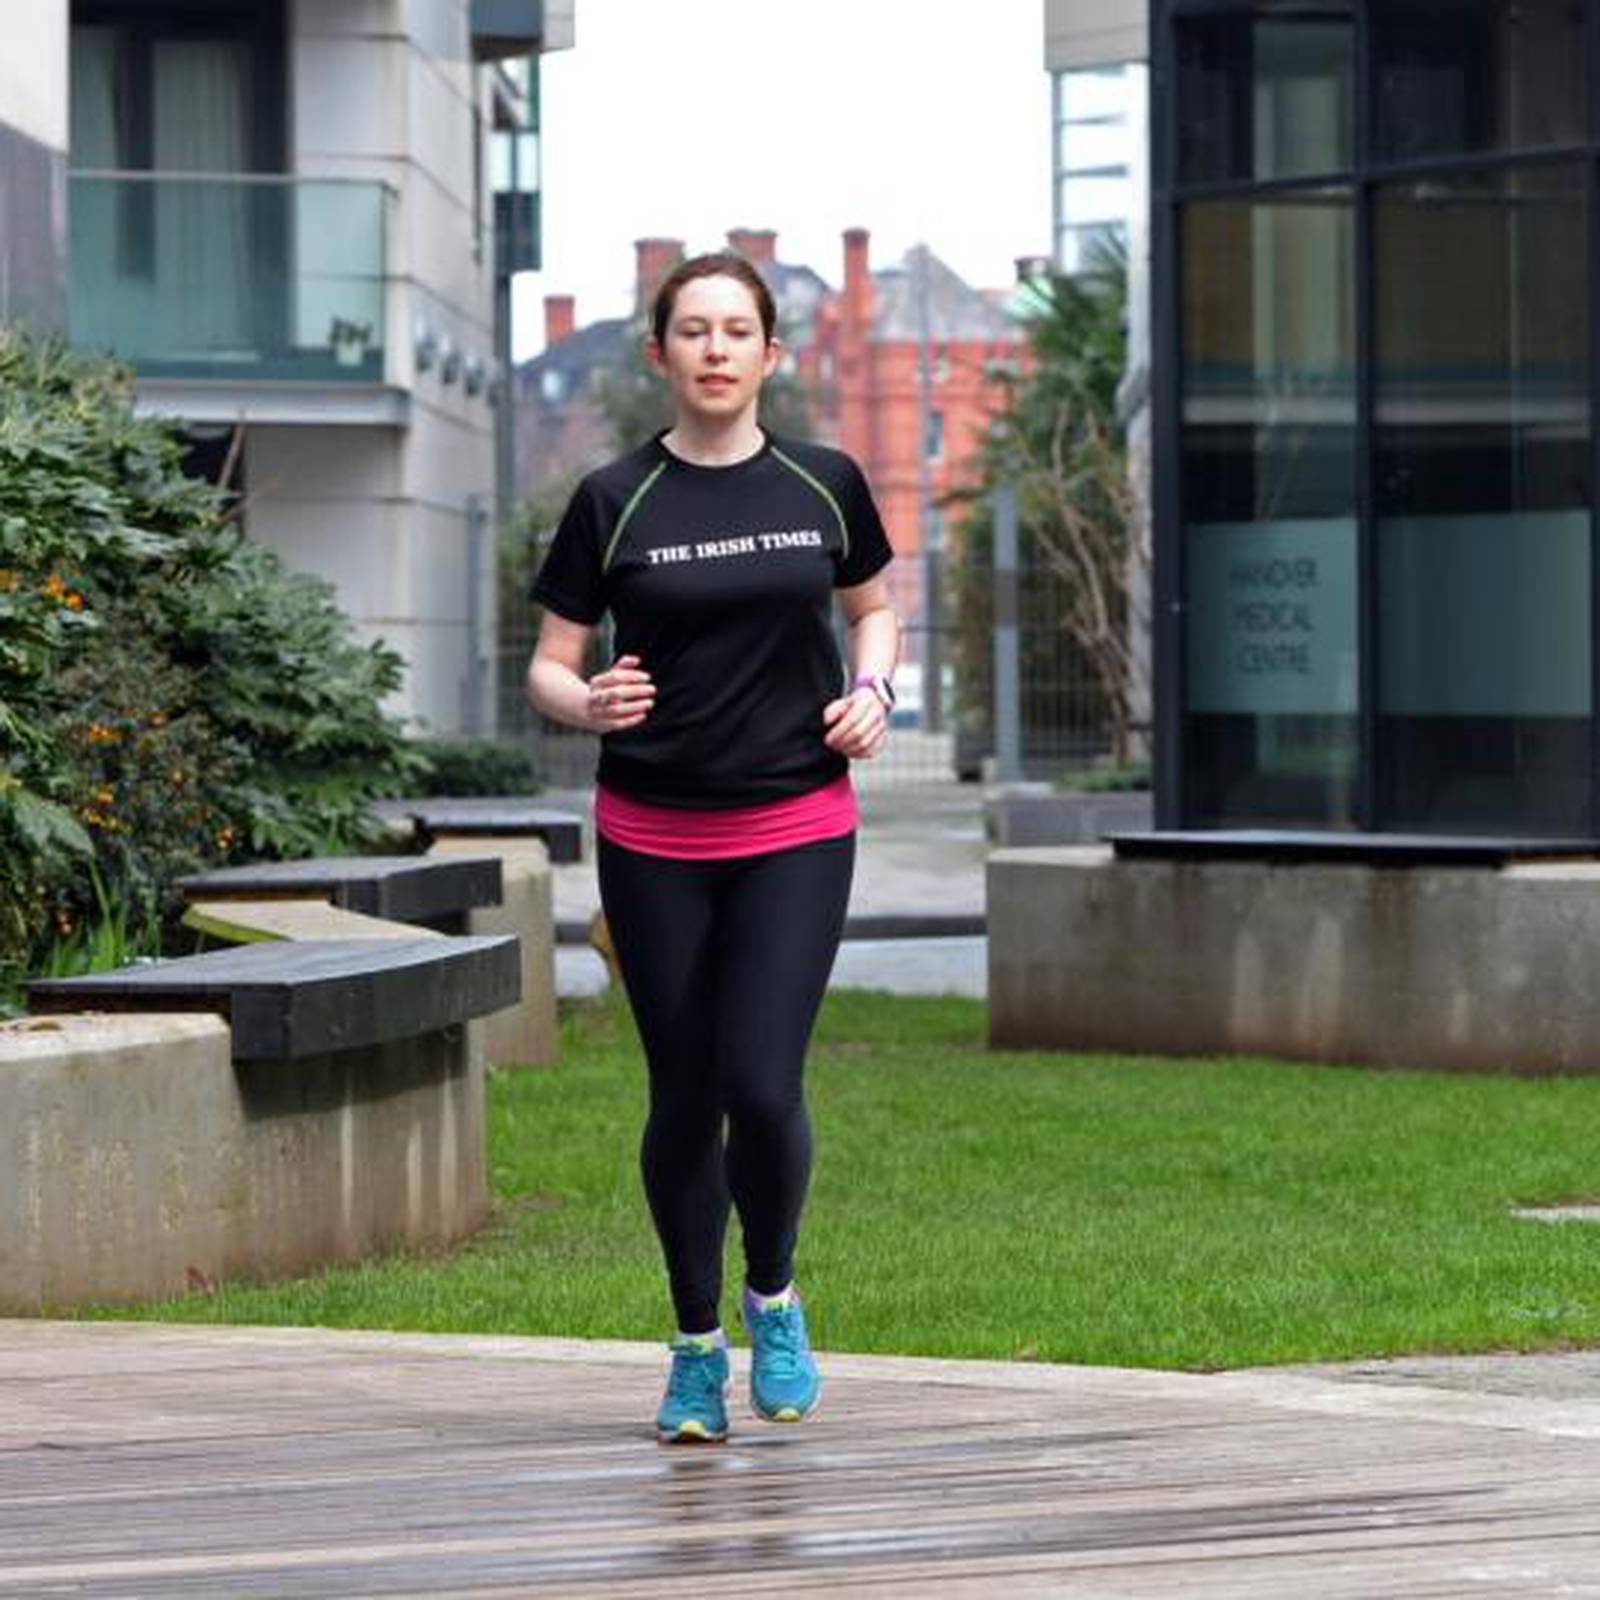 Ditch the excuses and join us for Get Running – The Irish Times